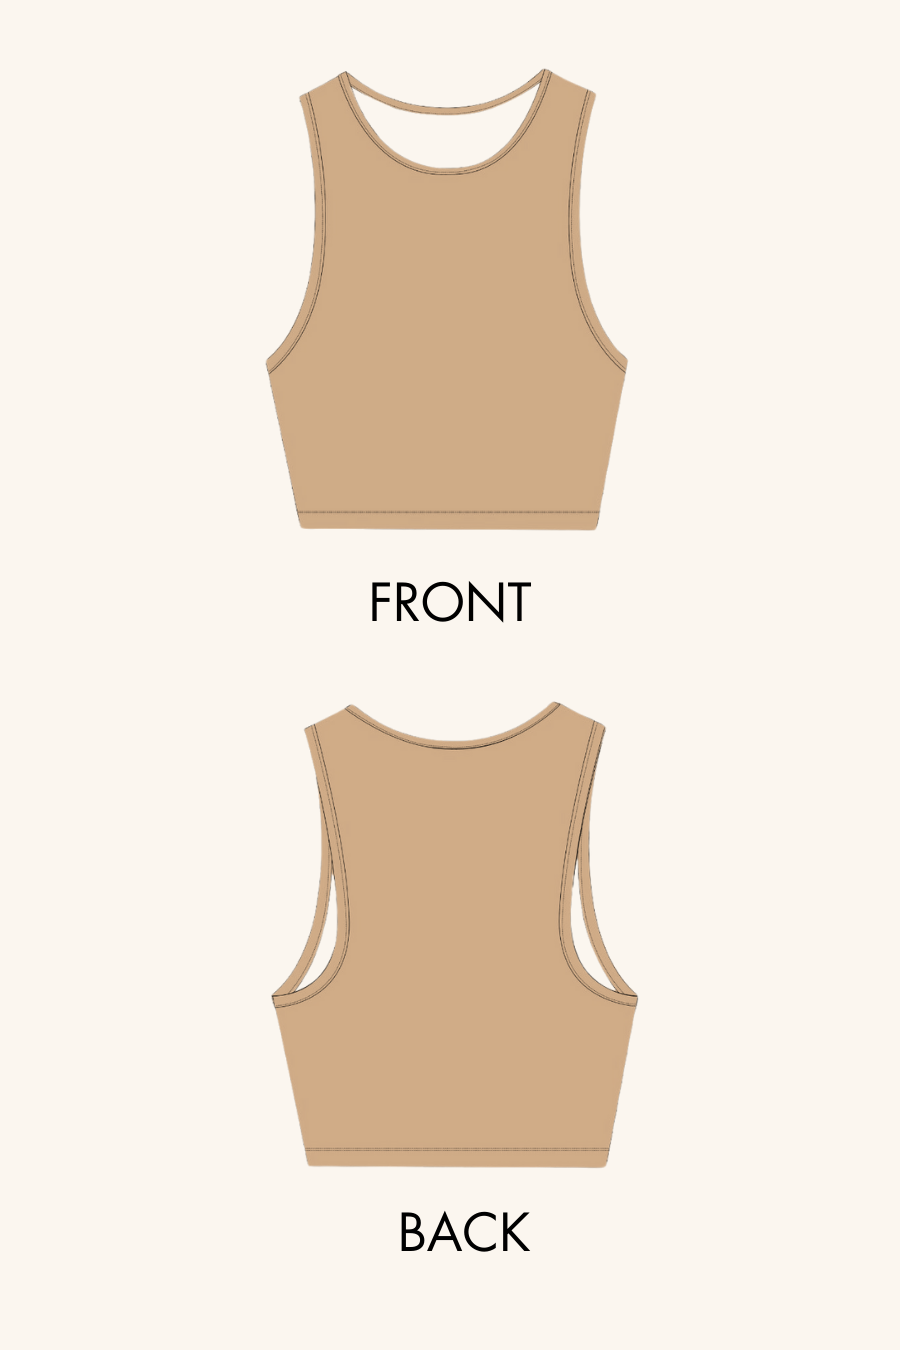 Tank top sewing pattern pieces